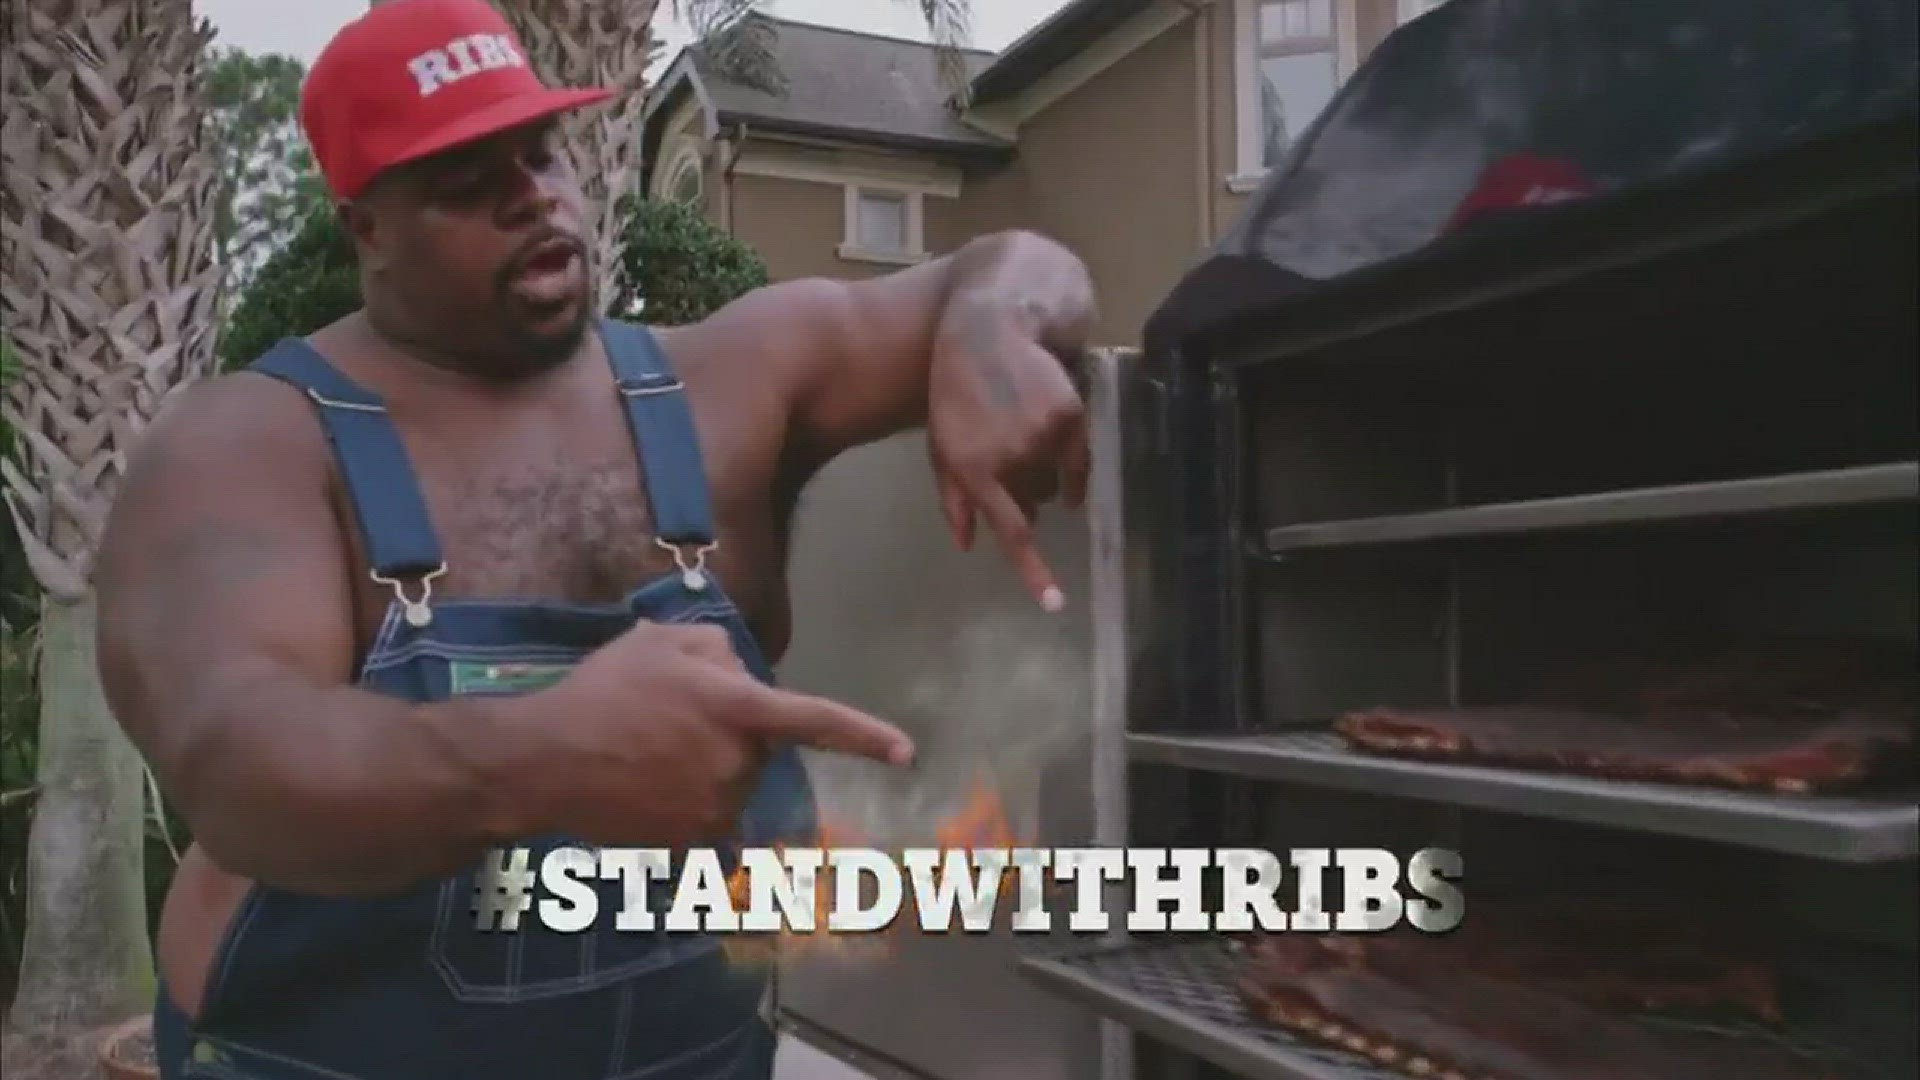 Vince Wilfork Talks BBQ Ribs, Retirement Odds, Injury Recovery